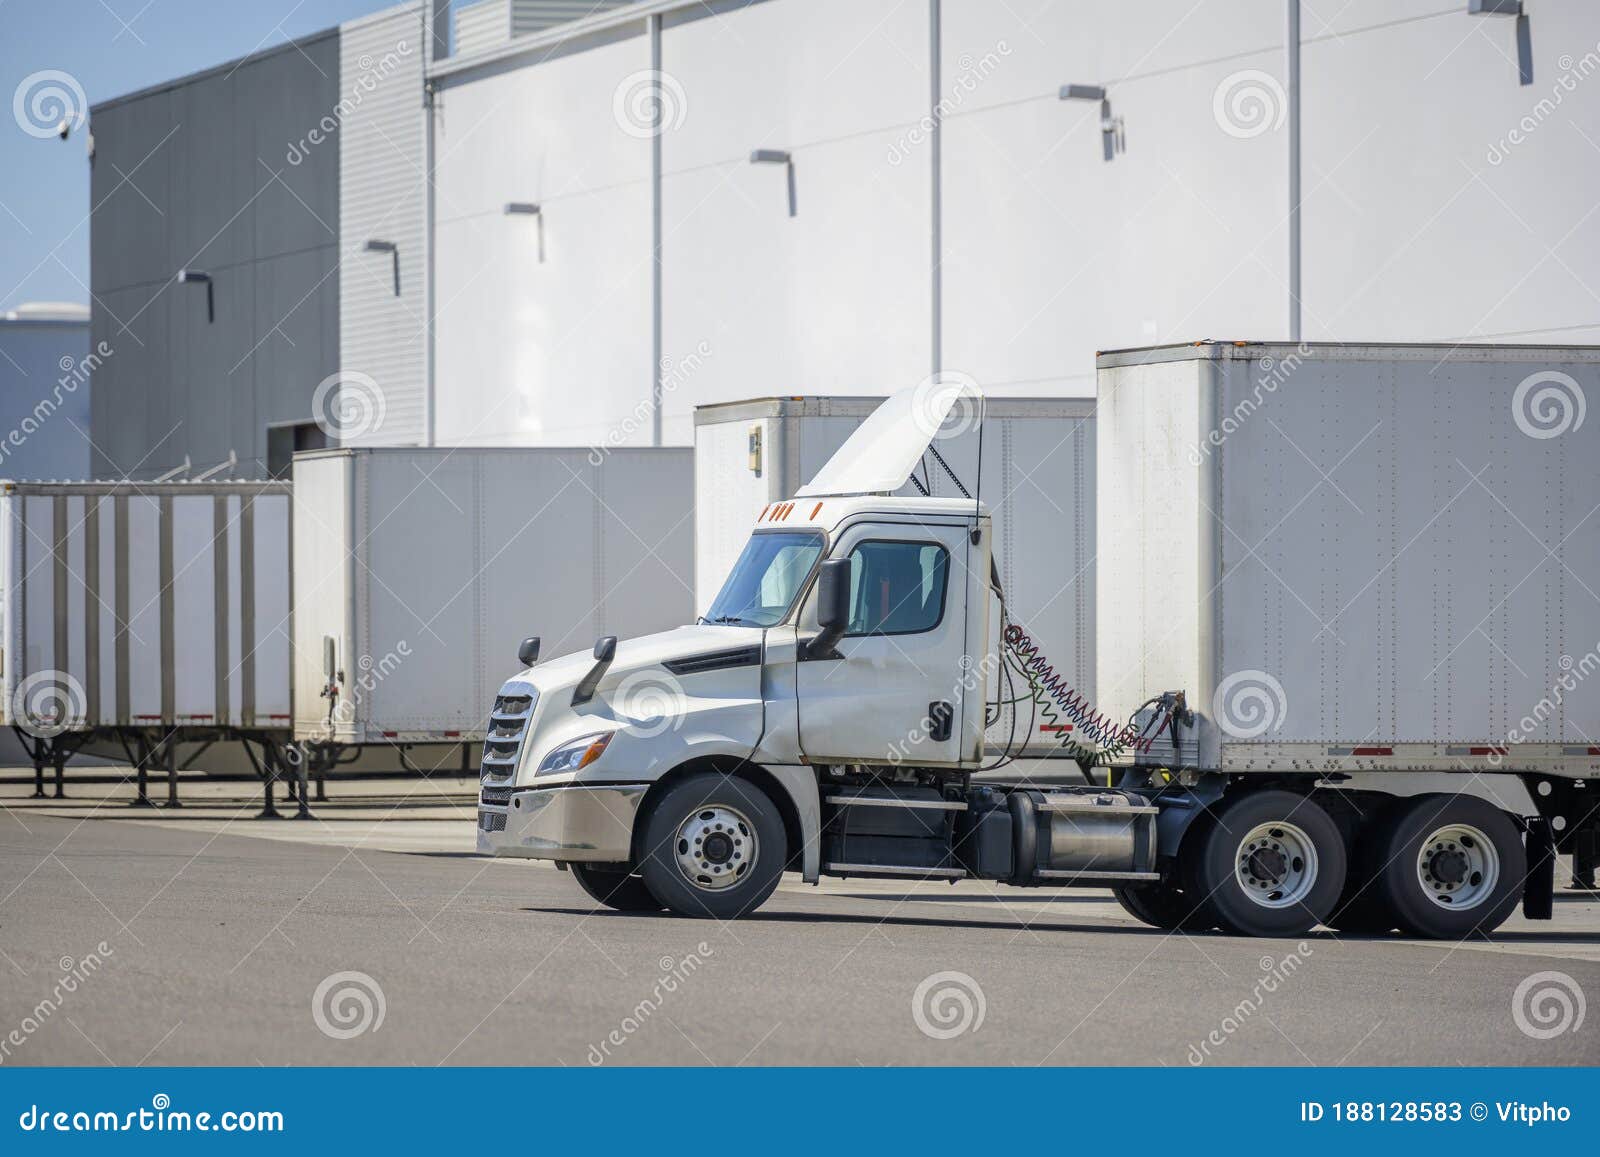 big rig commercial day cab semi truck with dry van semi trailer loading cargo at warehouse dock for the next delivery